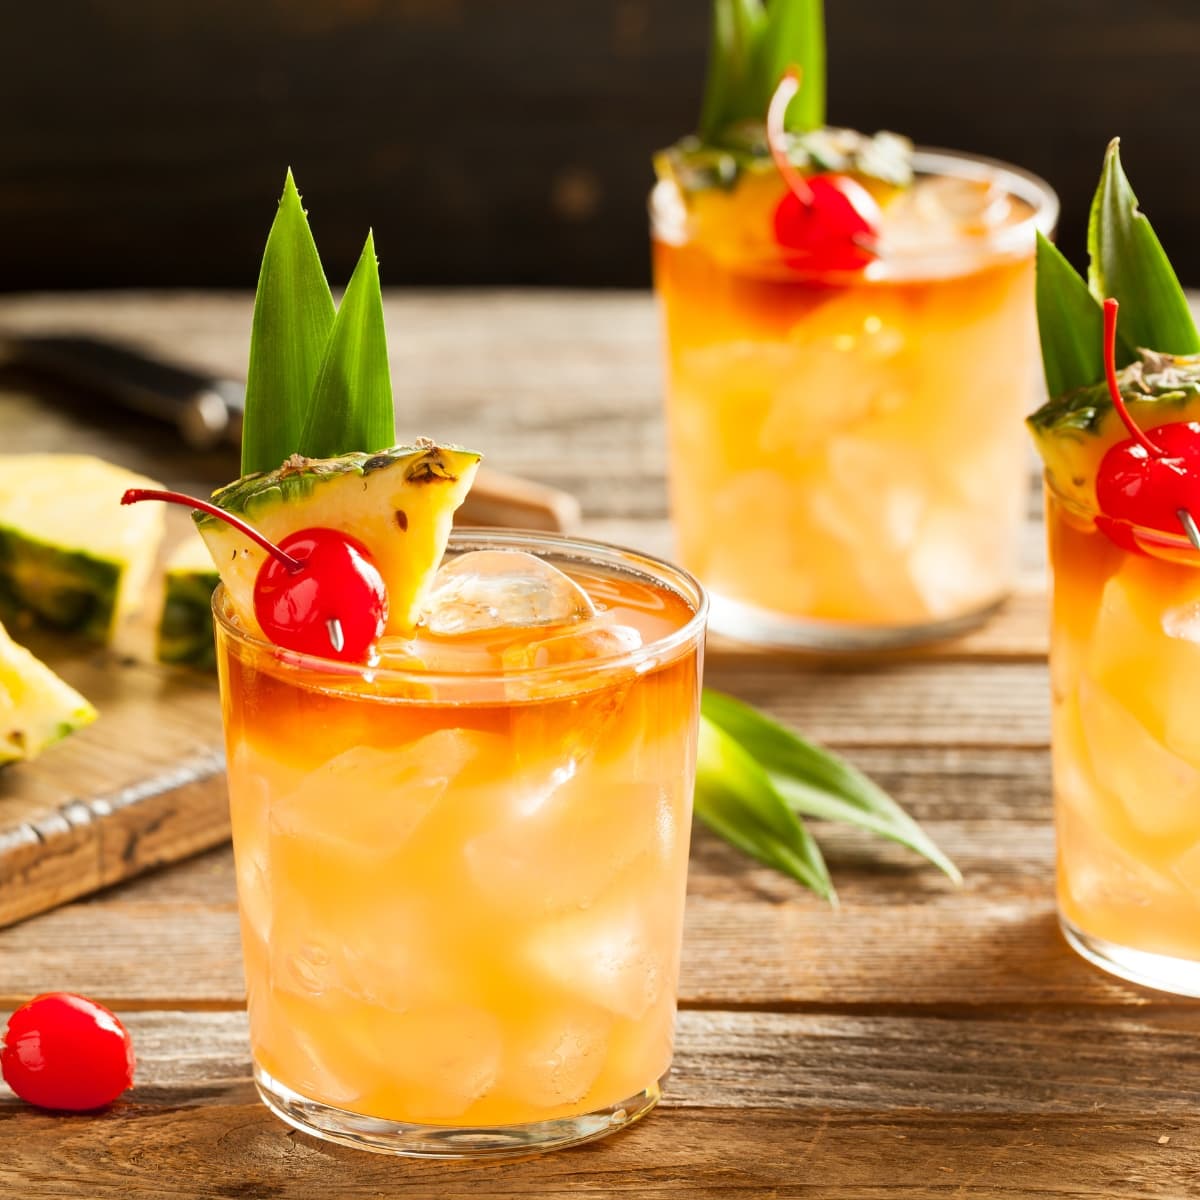 Three Glasses of Mai Tai Cocktail with Cherry and Pineapple Garnish on a Wooden Table with a Wooden Cutting Board in the Background with Cut Pineapple Slices